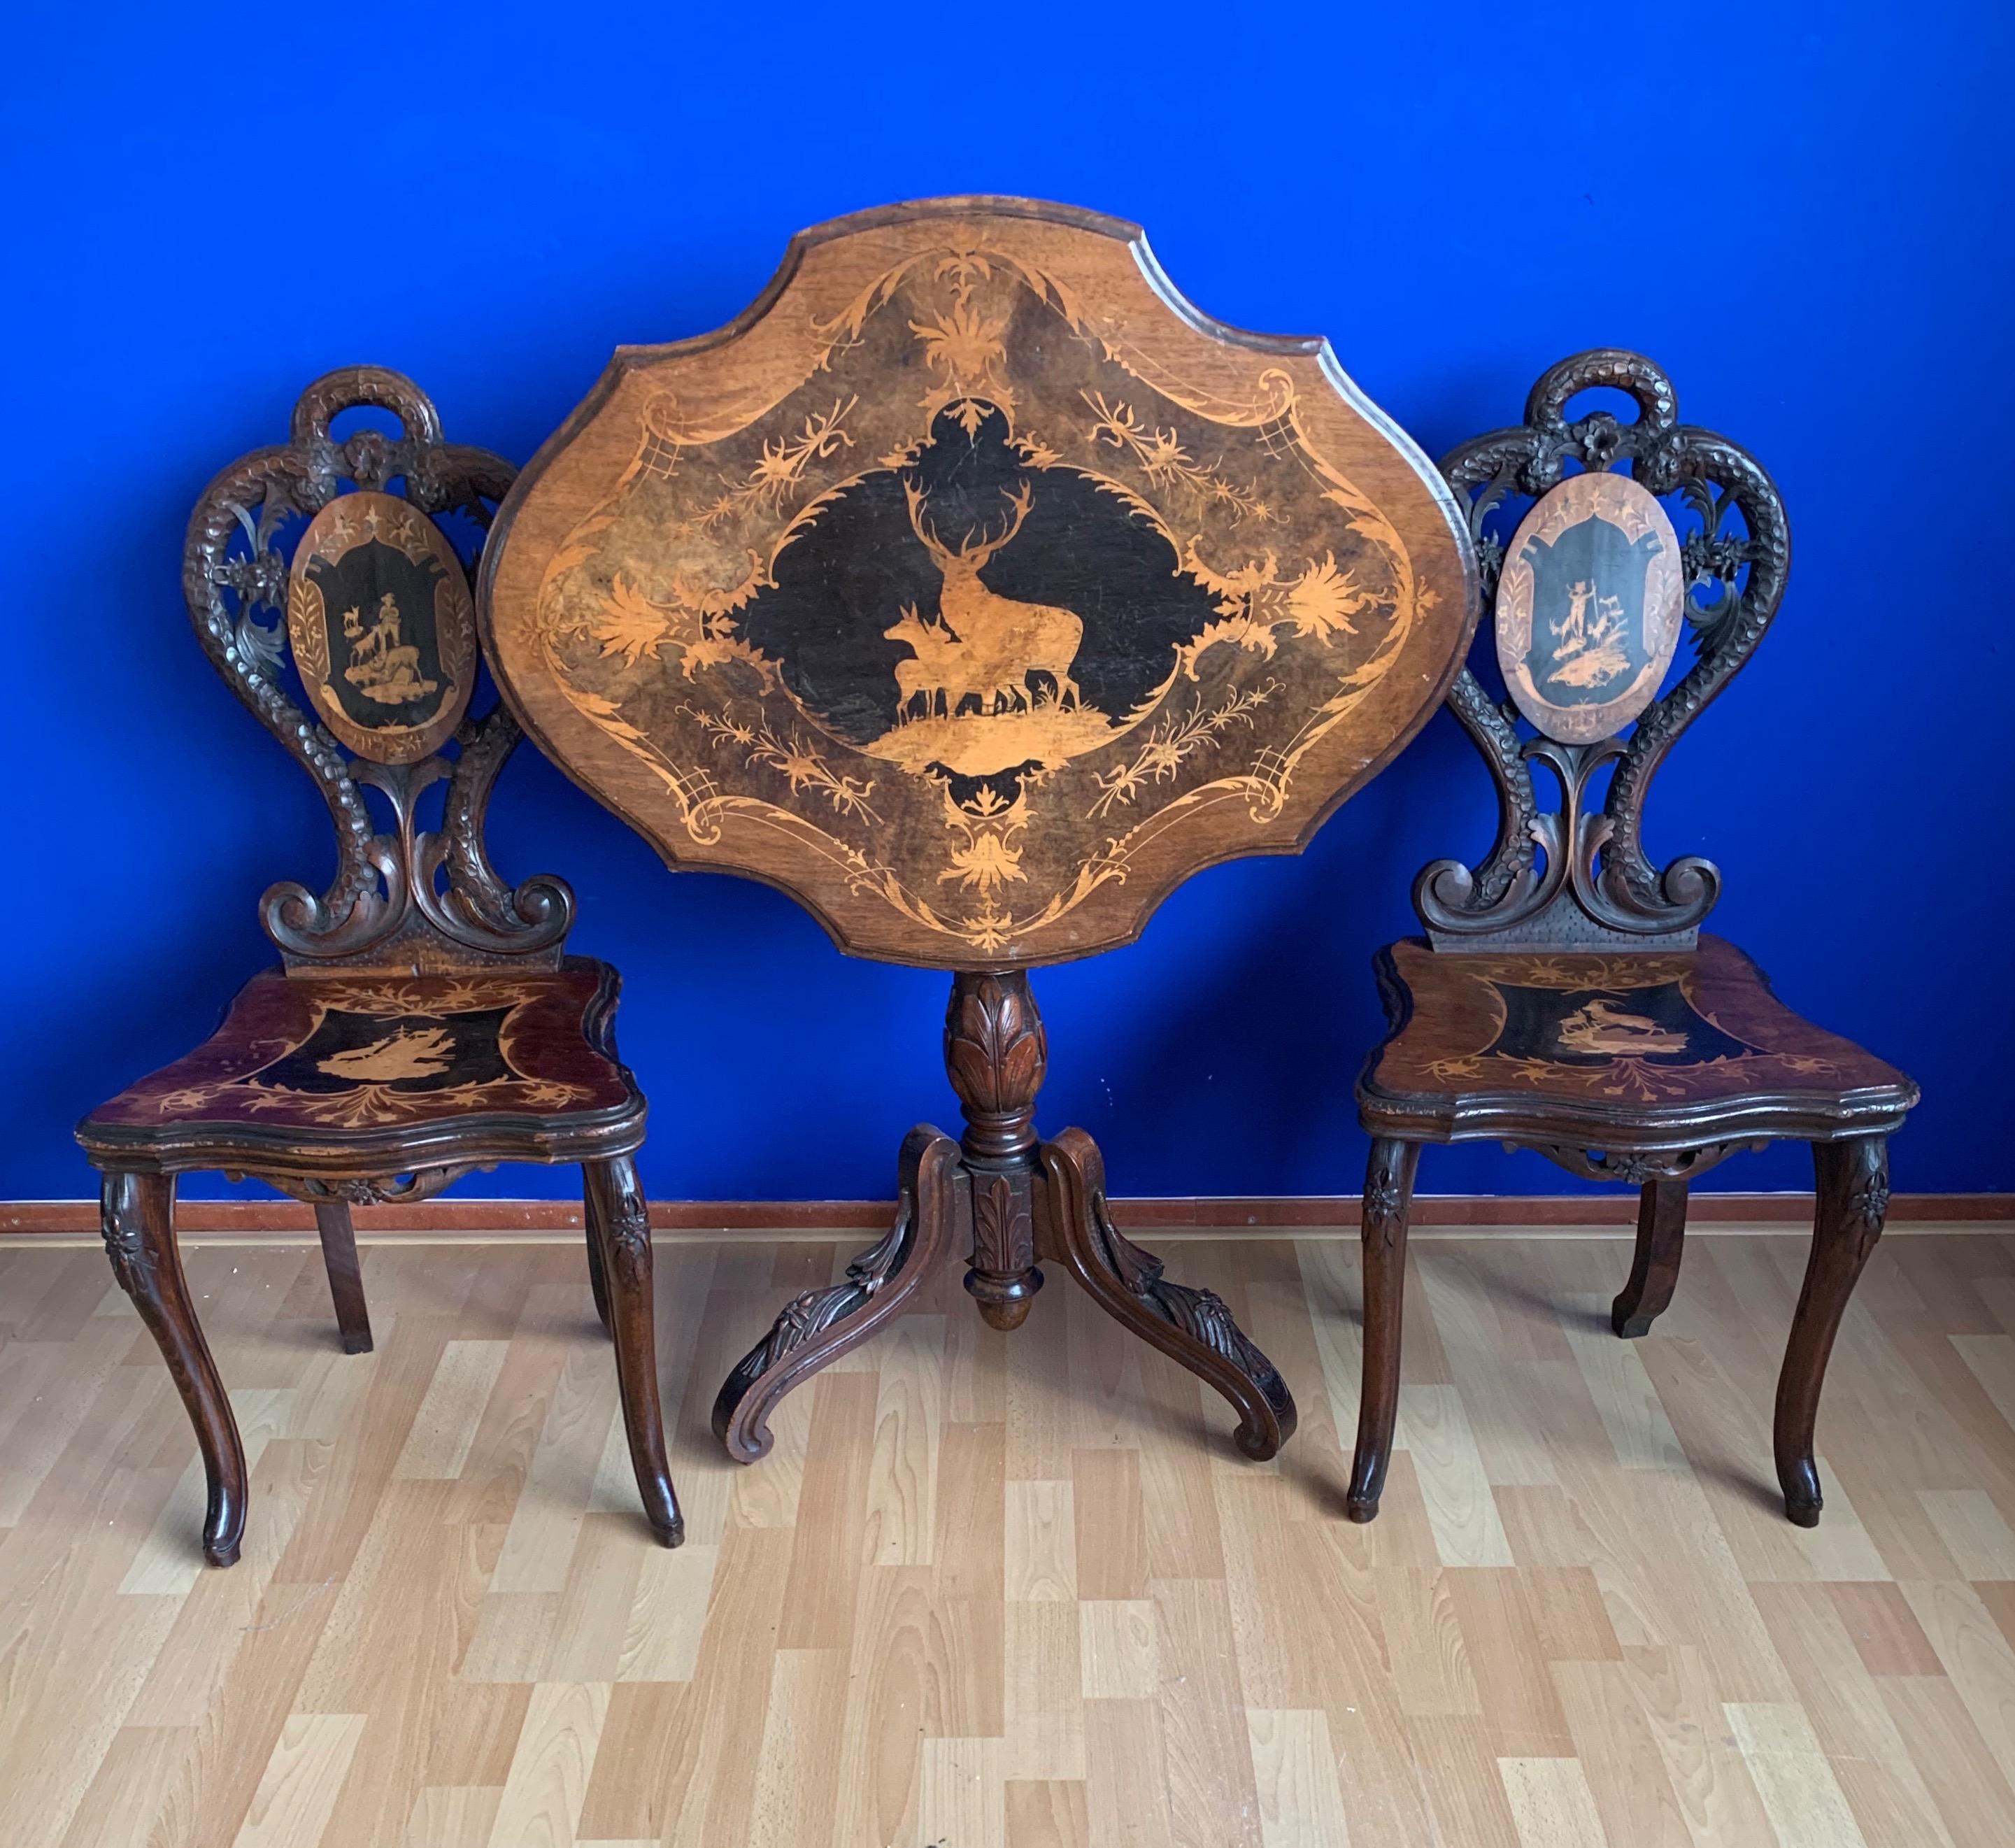 Stunning hand carved Black Forest hall set with marquetry inlay.

These very well crafted pieces of Black Forest furniture are an incredible sight to see. The workmanship and the large amount of finest details make this set highly decorative and an